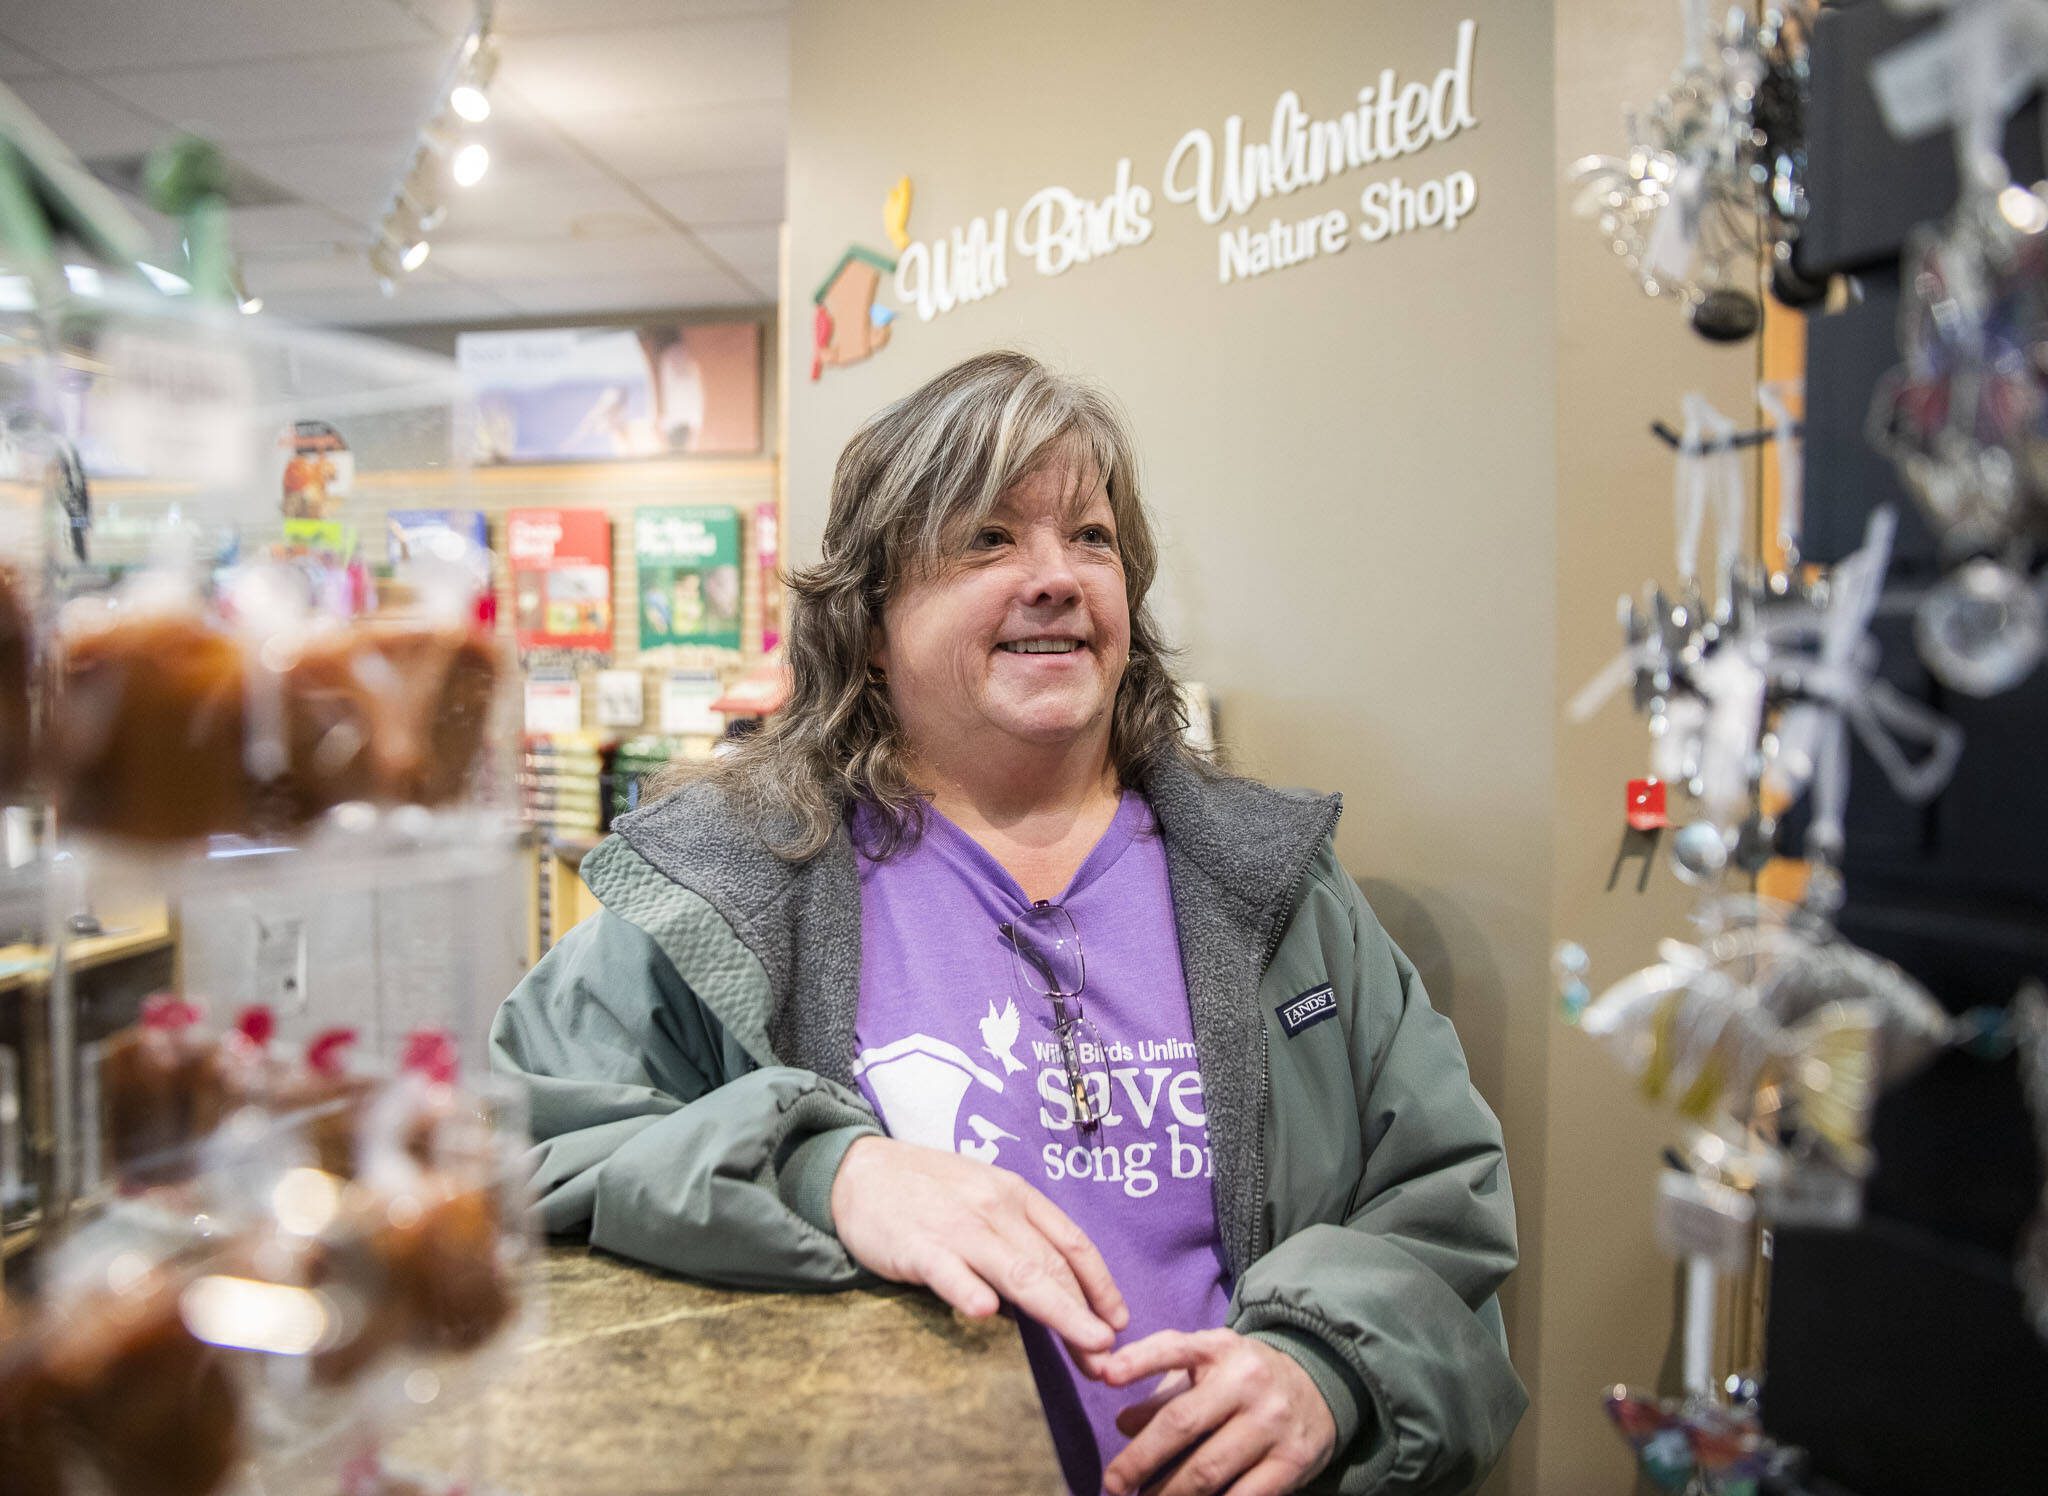 Everett’s Wild Birds Unlimited owner Shannon Bailey at her store on Monday, Oct. 23, 2023 in Everett, Washington. (Olivia Vanni / The Herald)